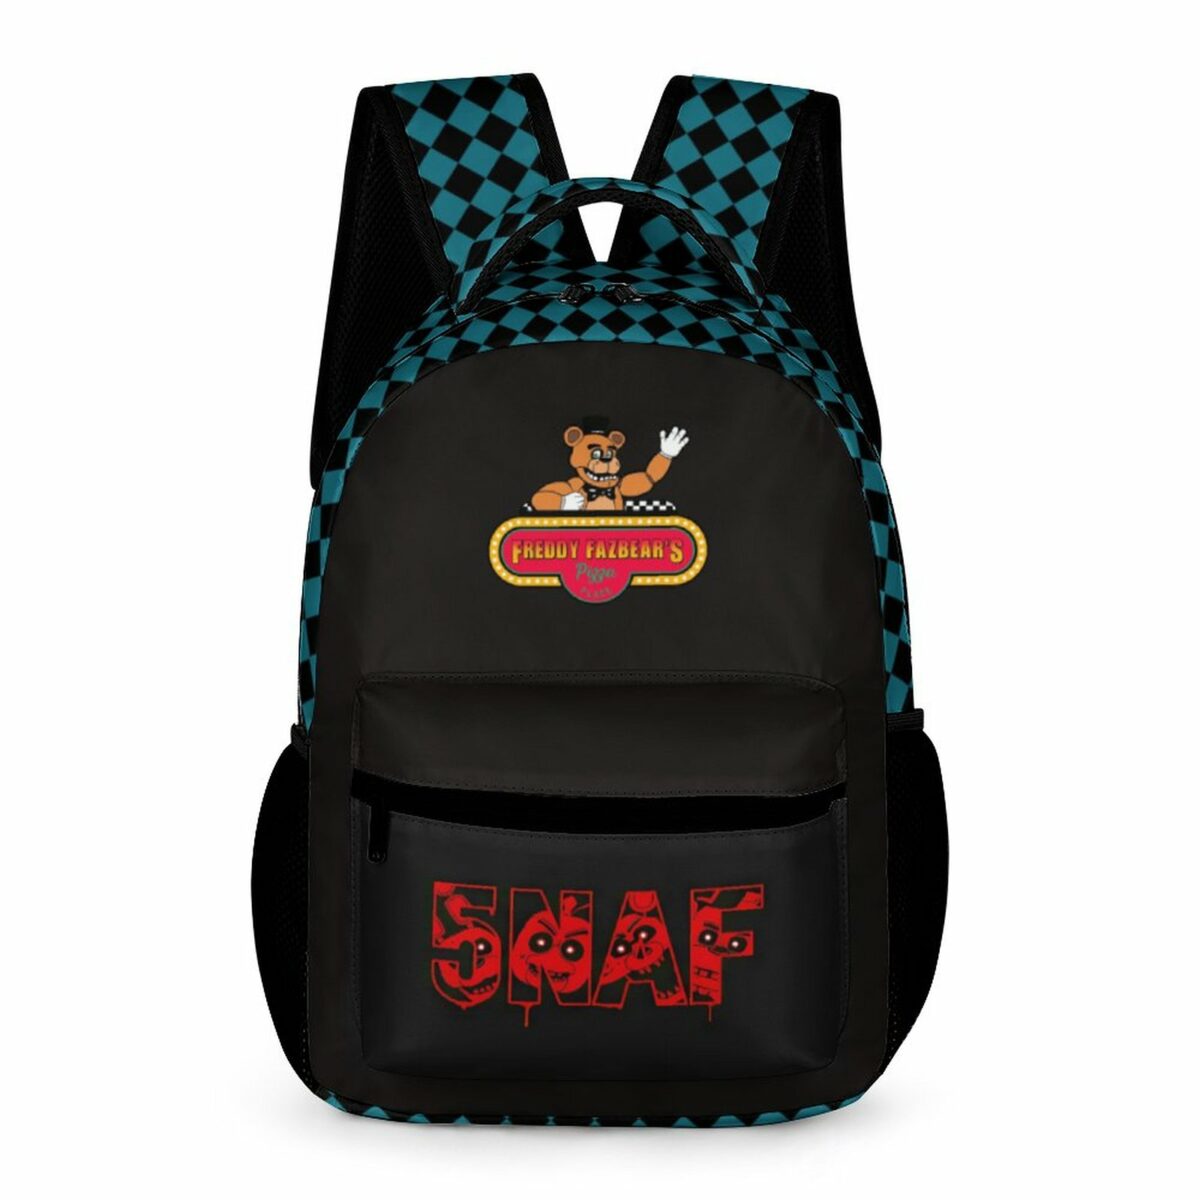 Five Nights At Freddy’s Black and Blue Backpack. Comfortable and Lightweight Book Bag for Kids Cool Kiddo 10